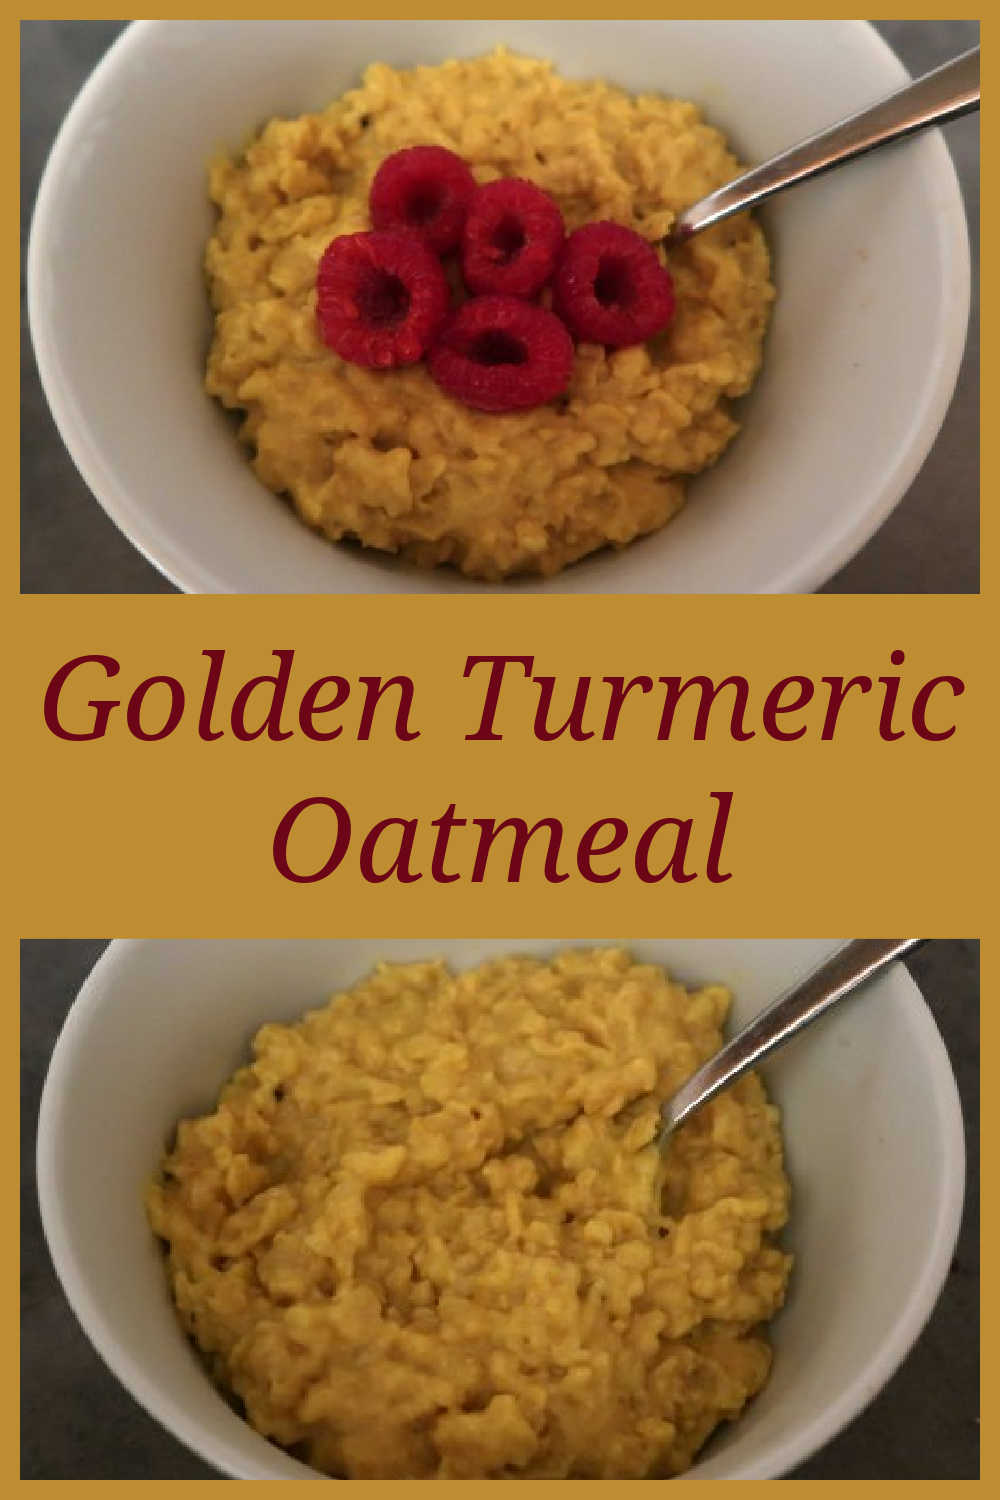 Turmeric Oatmeal Recipe - How to make quick turmeric golden milk oats porridge for an easy budget friendly breakfast - with the full video tutorial.